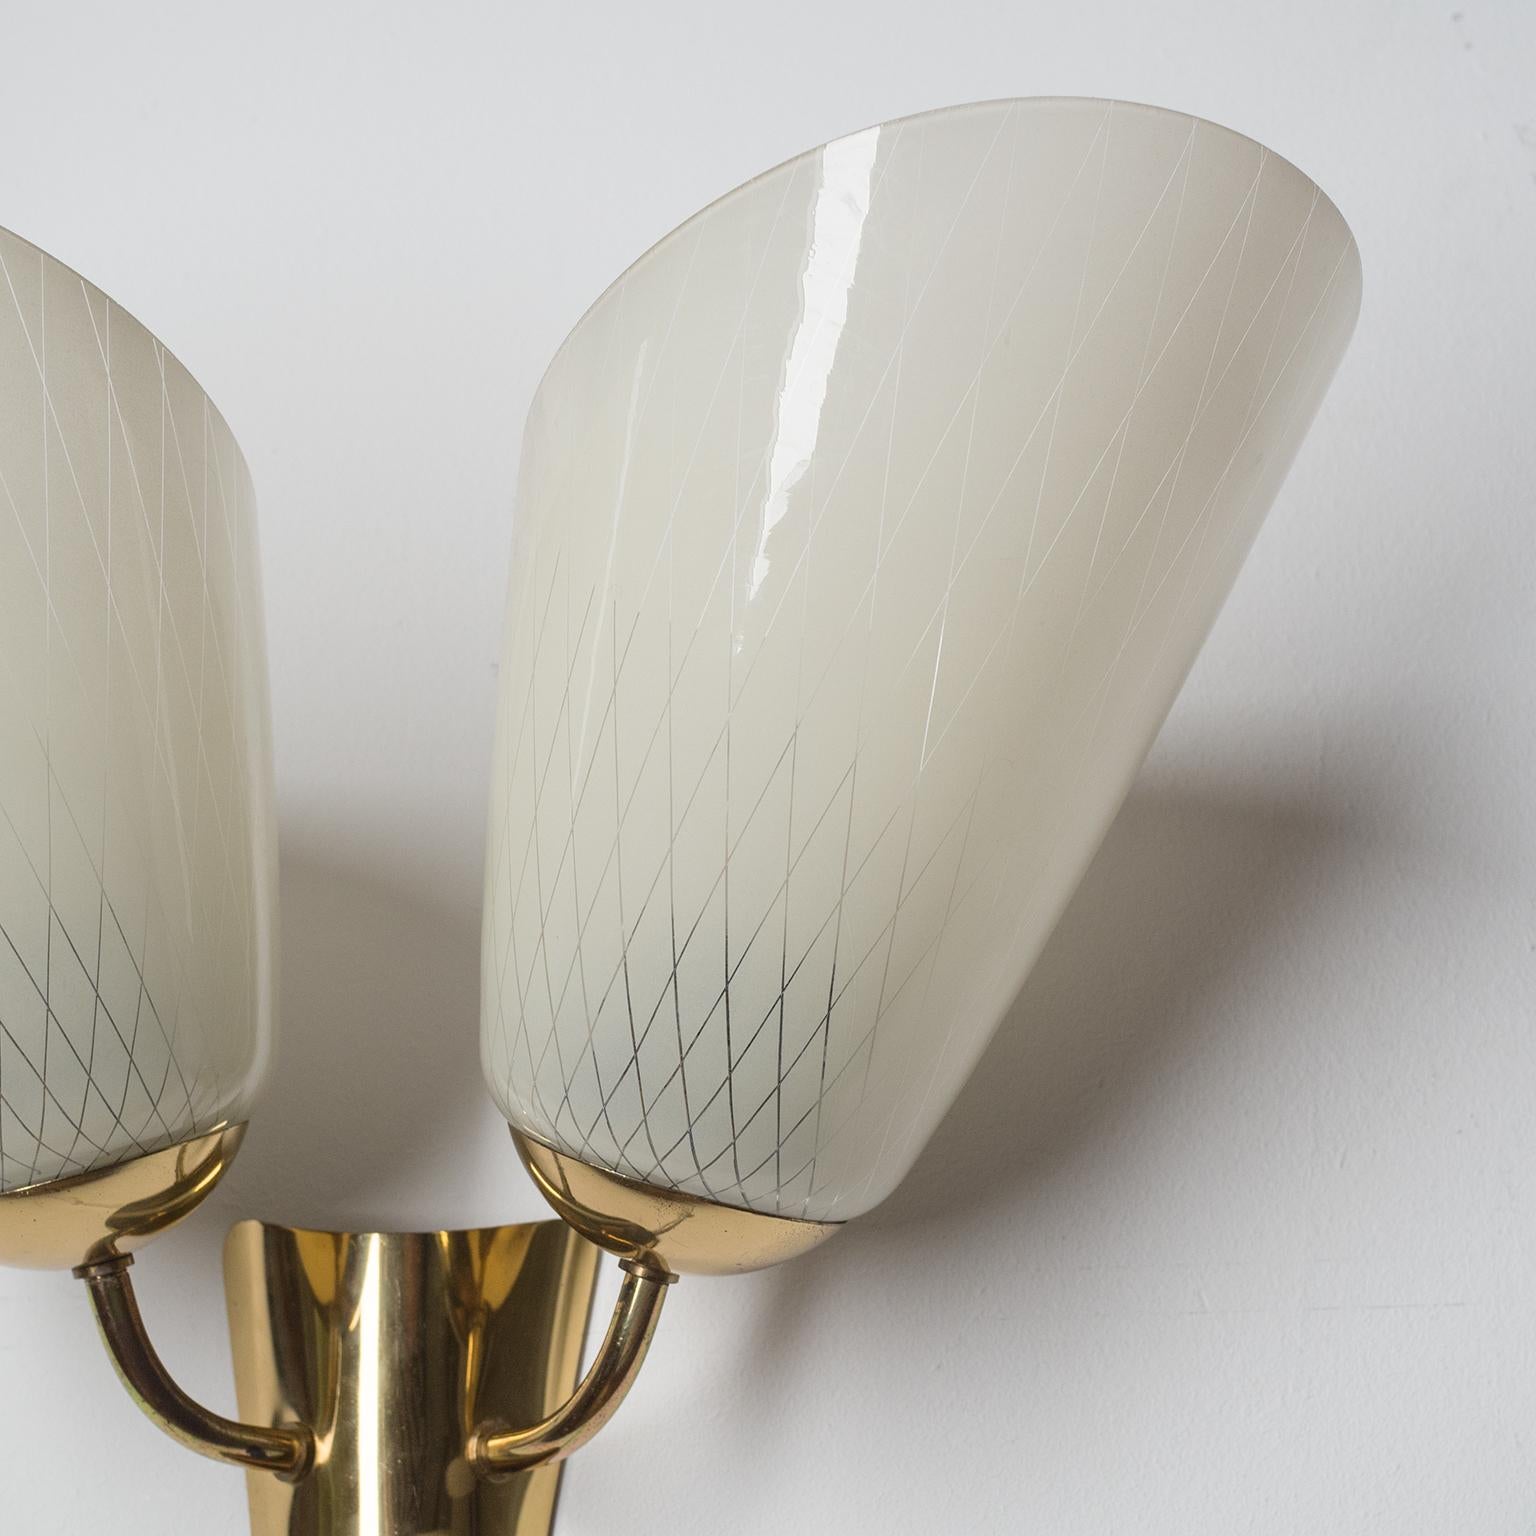 Two-Arm Wall Lamp, 1940s, Enameled Glass and Brass 2